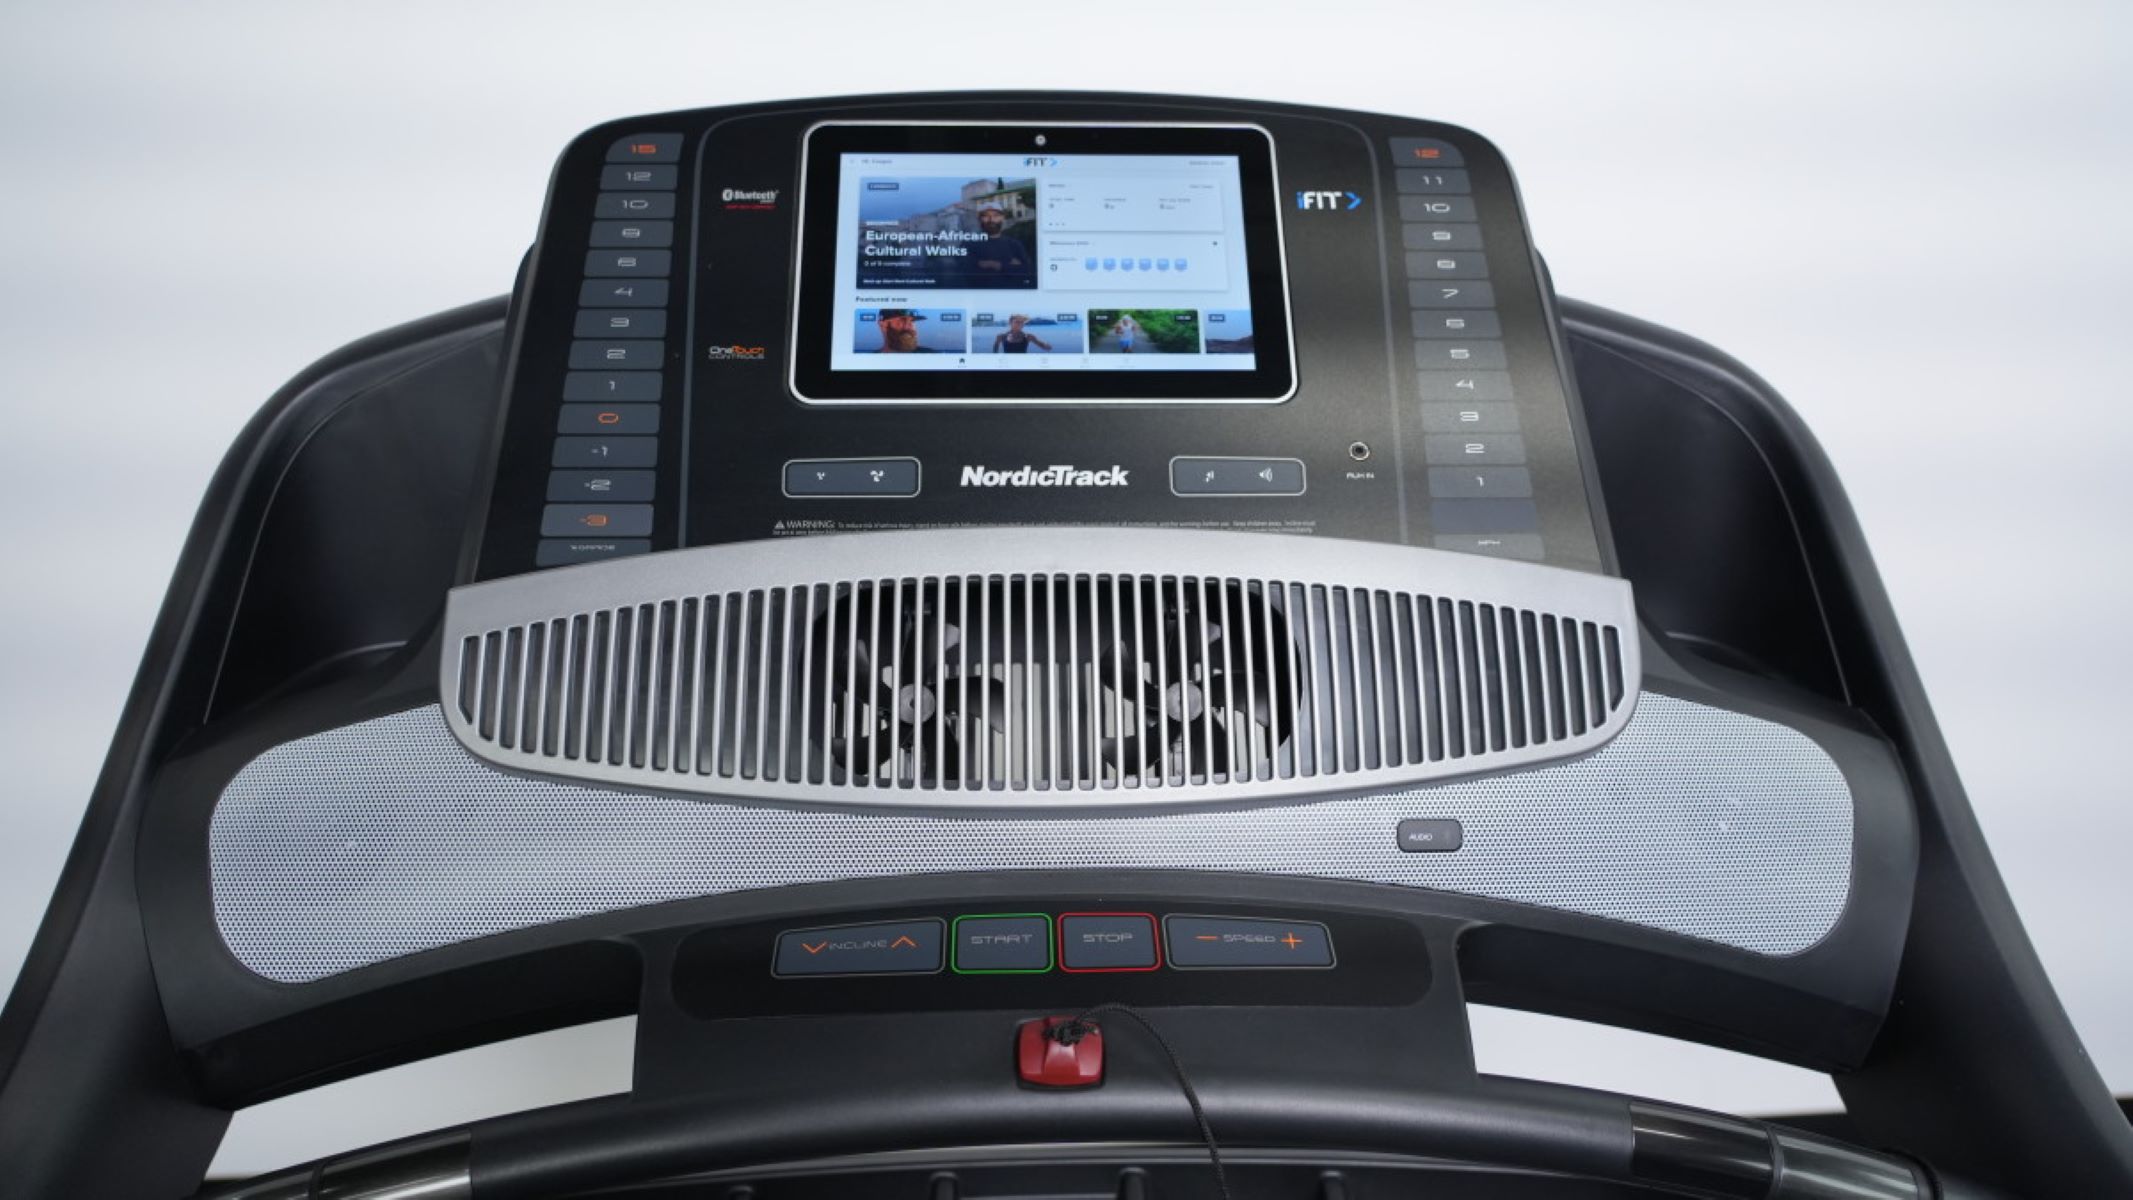 How To Turn On NordicTrack Treadmill